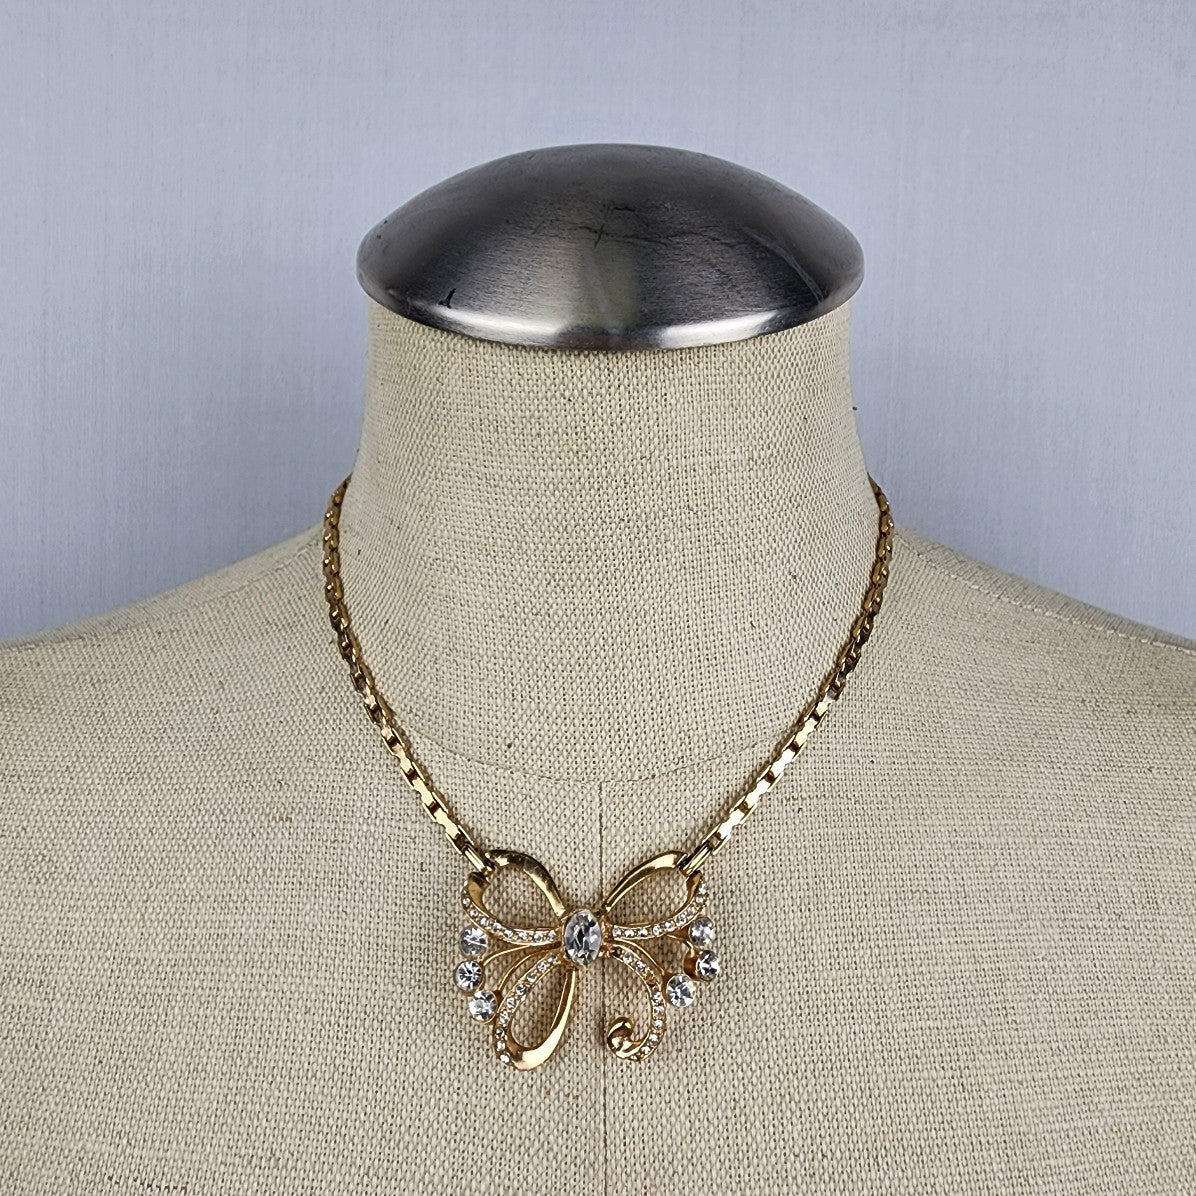 Vintage 12k Gold Fill Crystal Bow Collar Necklace